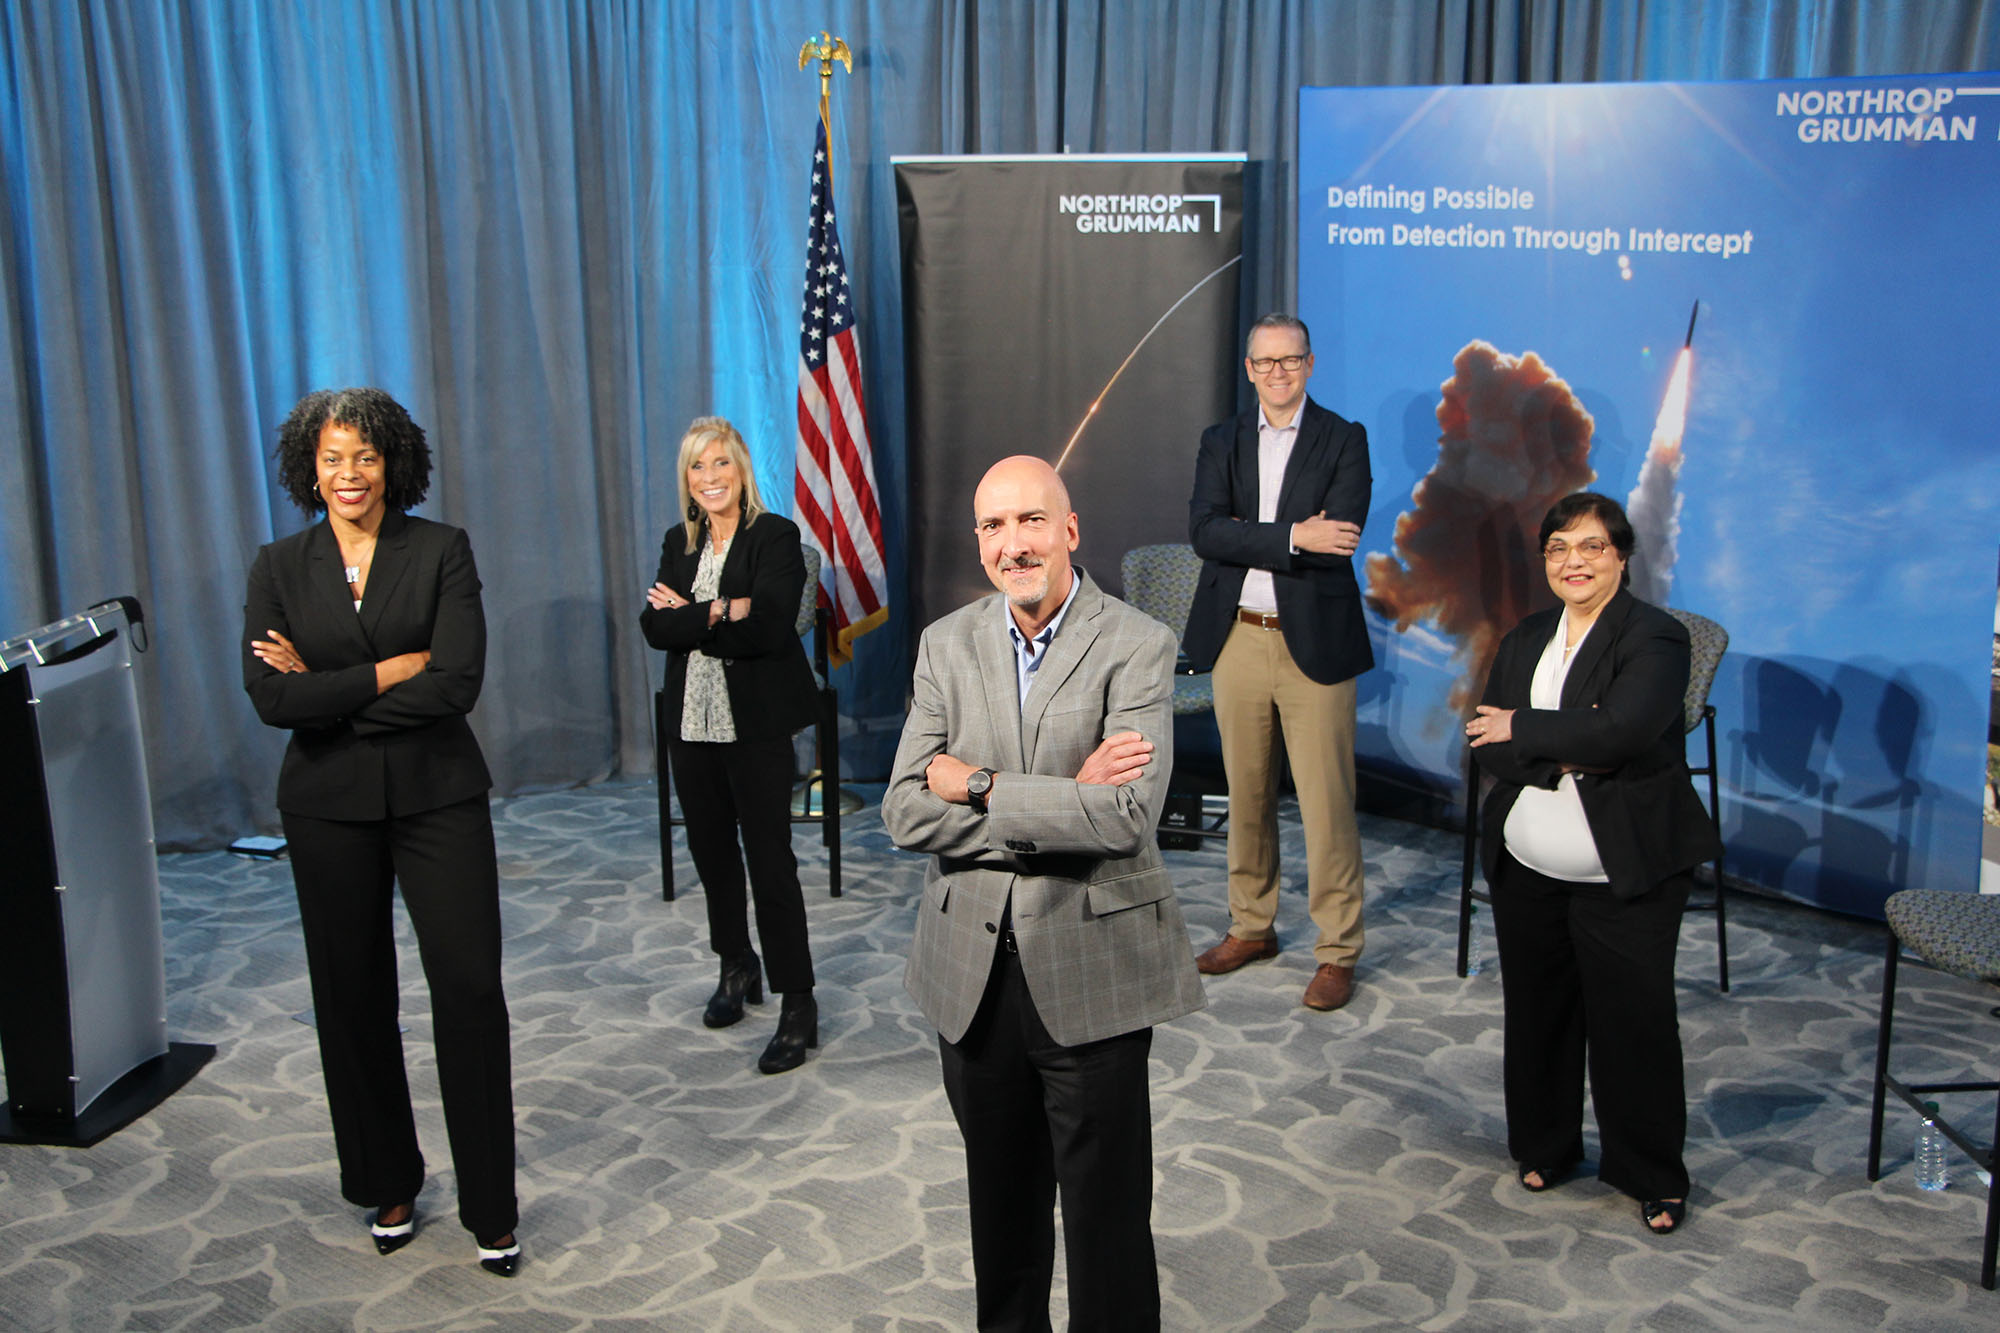 From left to right: A black female, white female, white male, white man and hispanic lady pose for a picture at a townhall in front of an American flag and company back drop